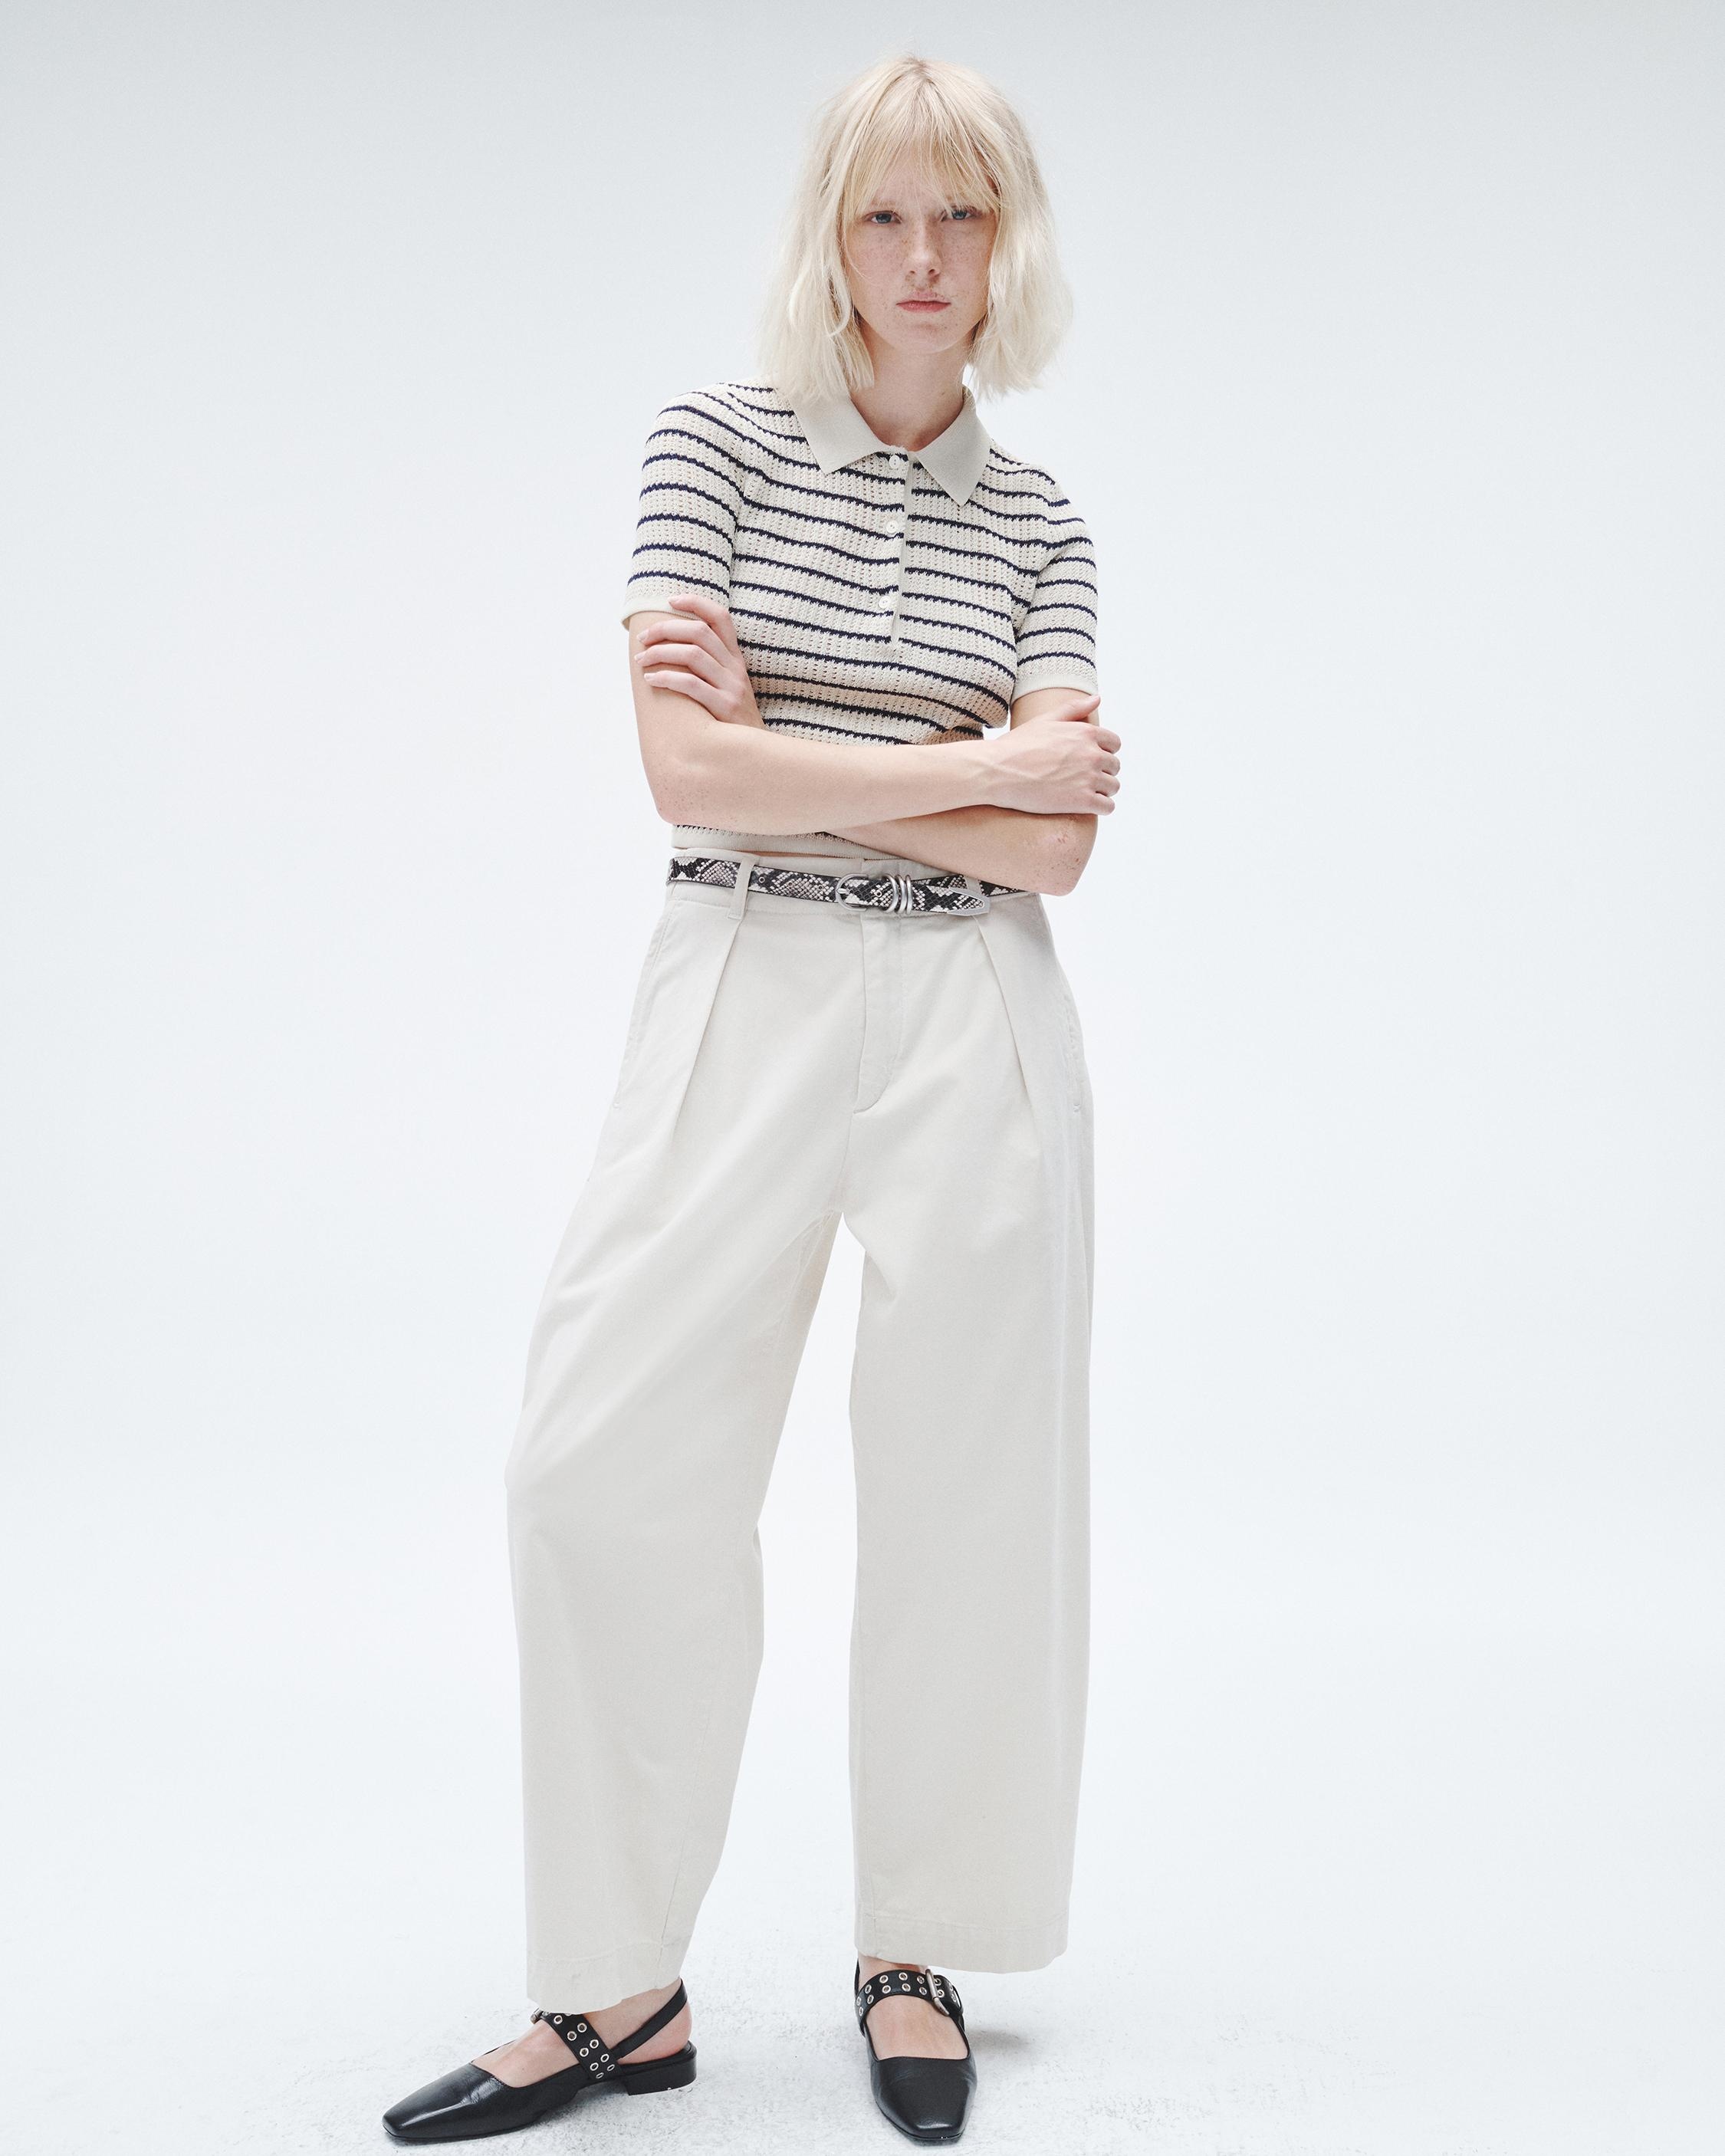 Donovan Cropped Cotton Pant
Relaxed Fit - 2